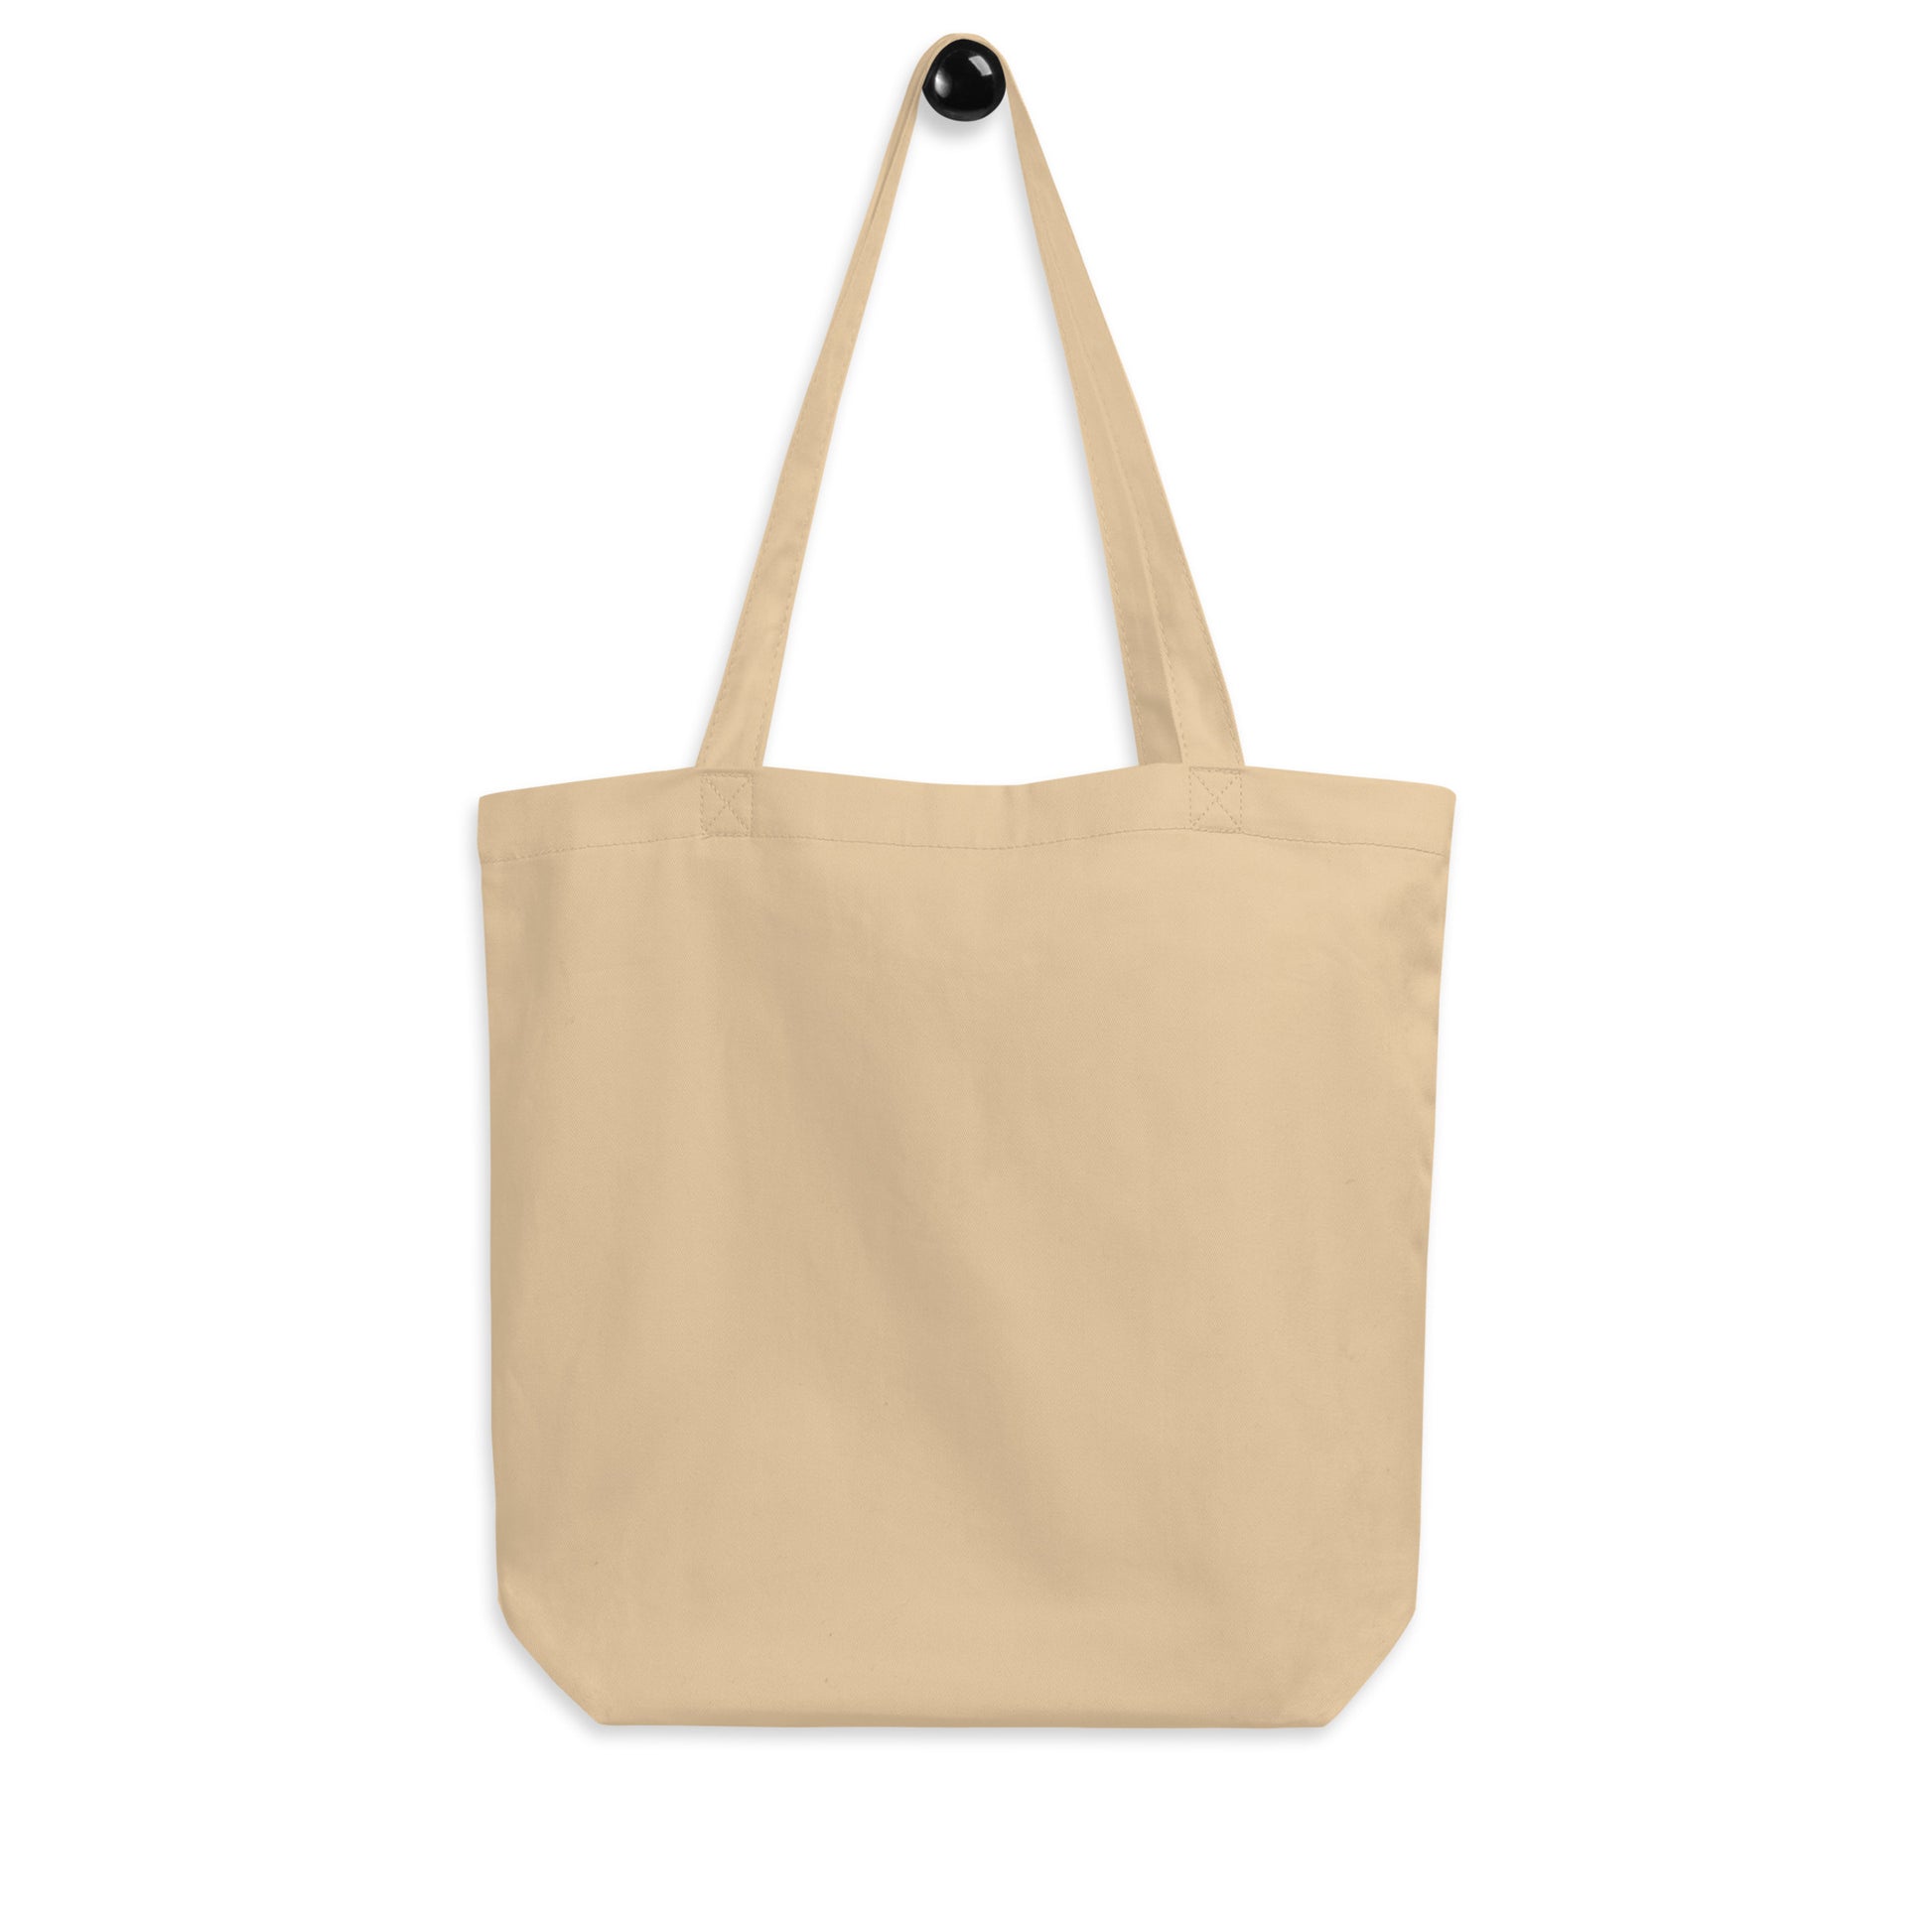 Aviation Gift Organic Tote - Black • AKL Auckland • YHM Designs - Image 05